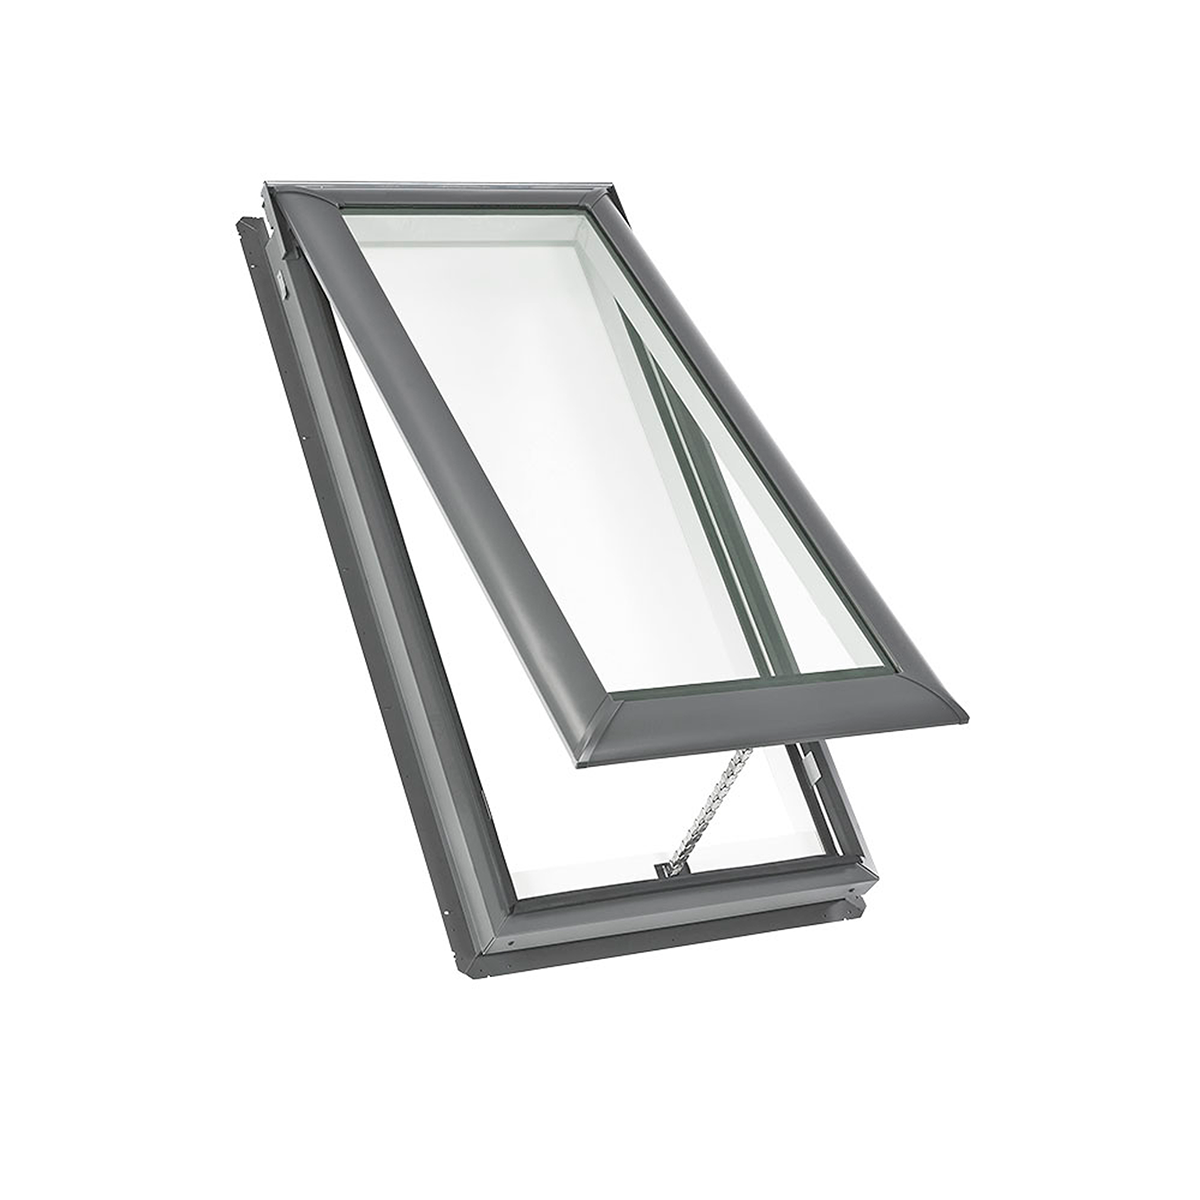 Manual Deck-Mount Skylight with Laminated Low-E3 Glass - 21 in. x 54-7/16 in. - VS C08